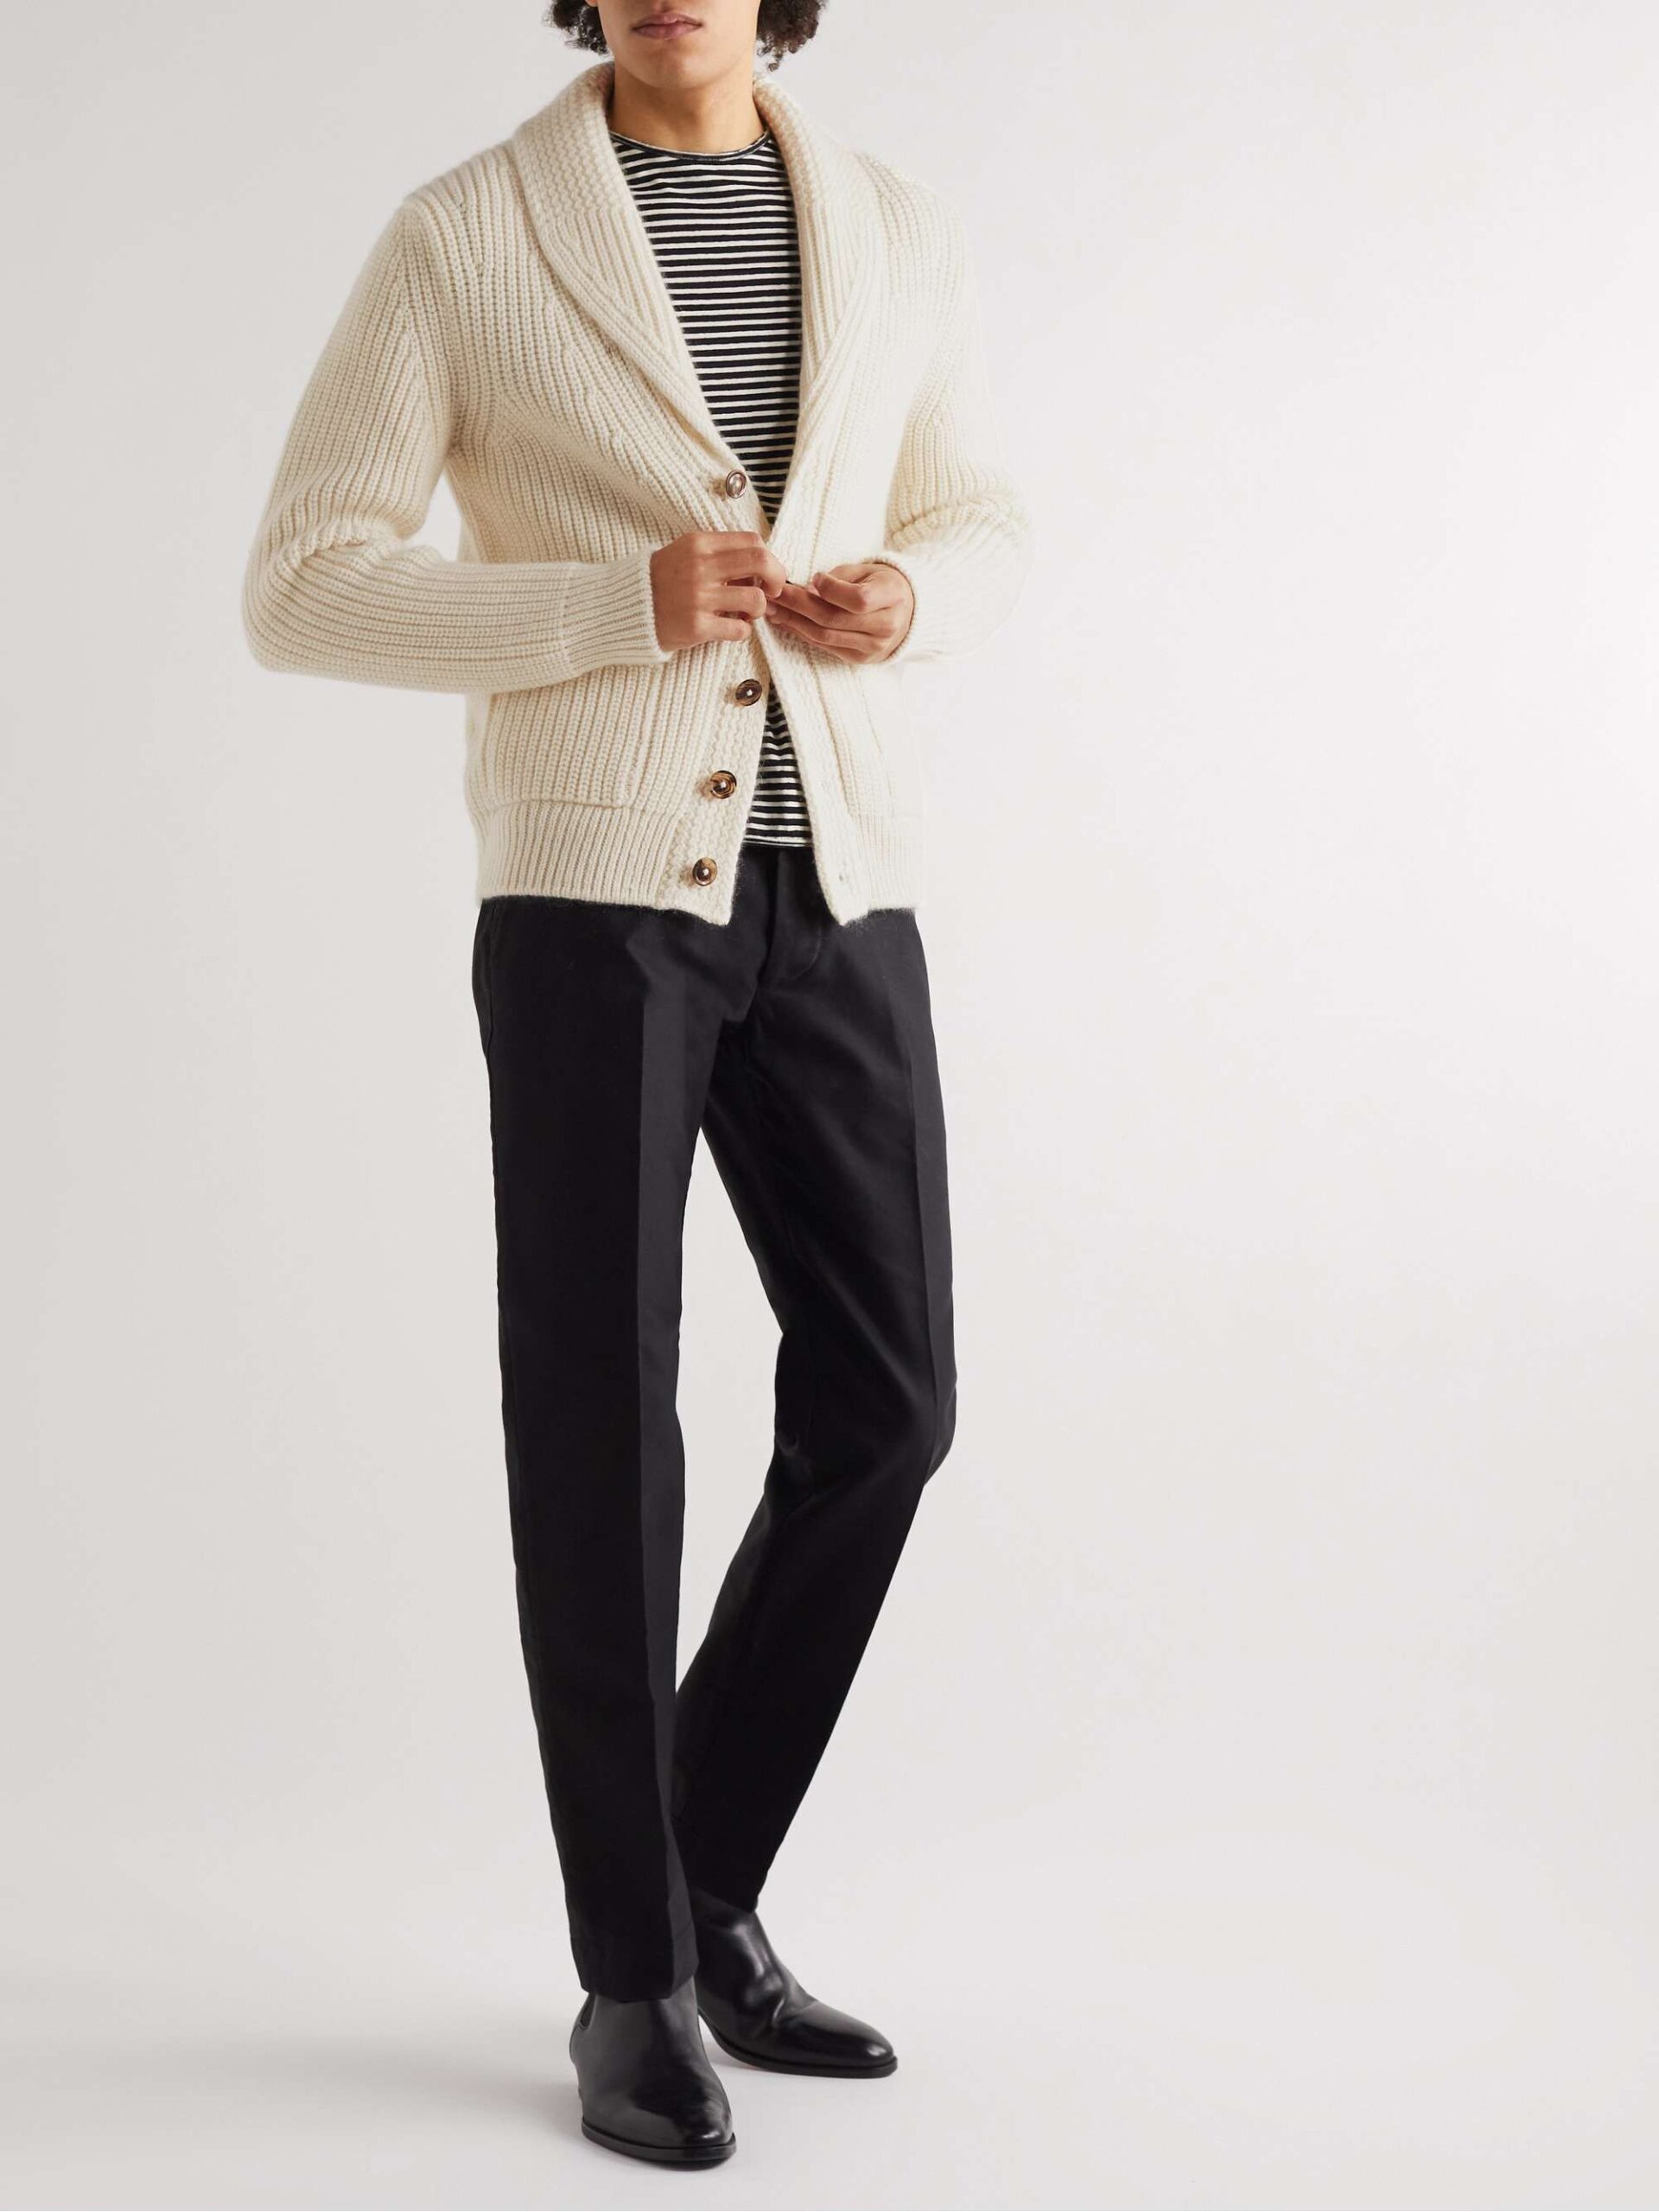 Men Outfits With Shawl Collar
  Sweaters And Cardigans